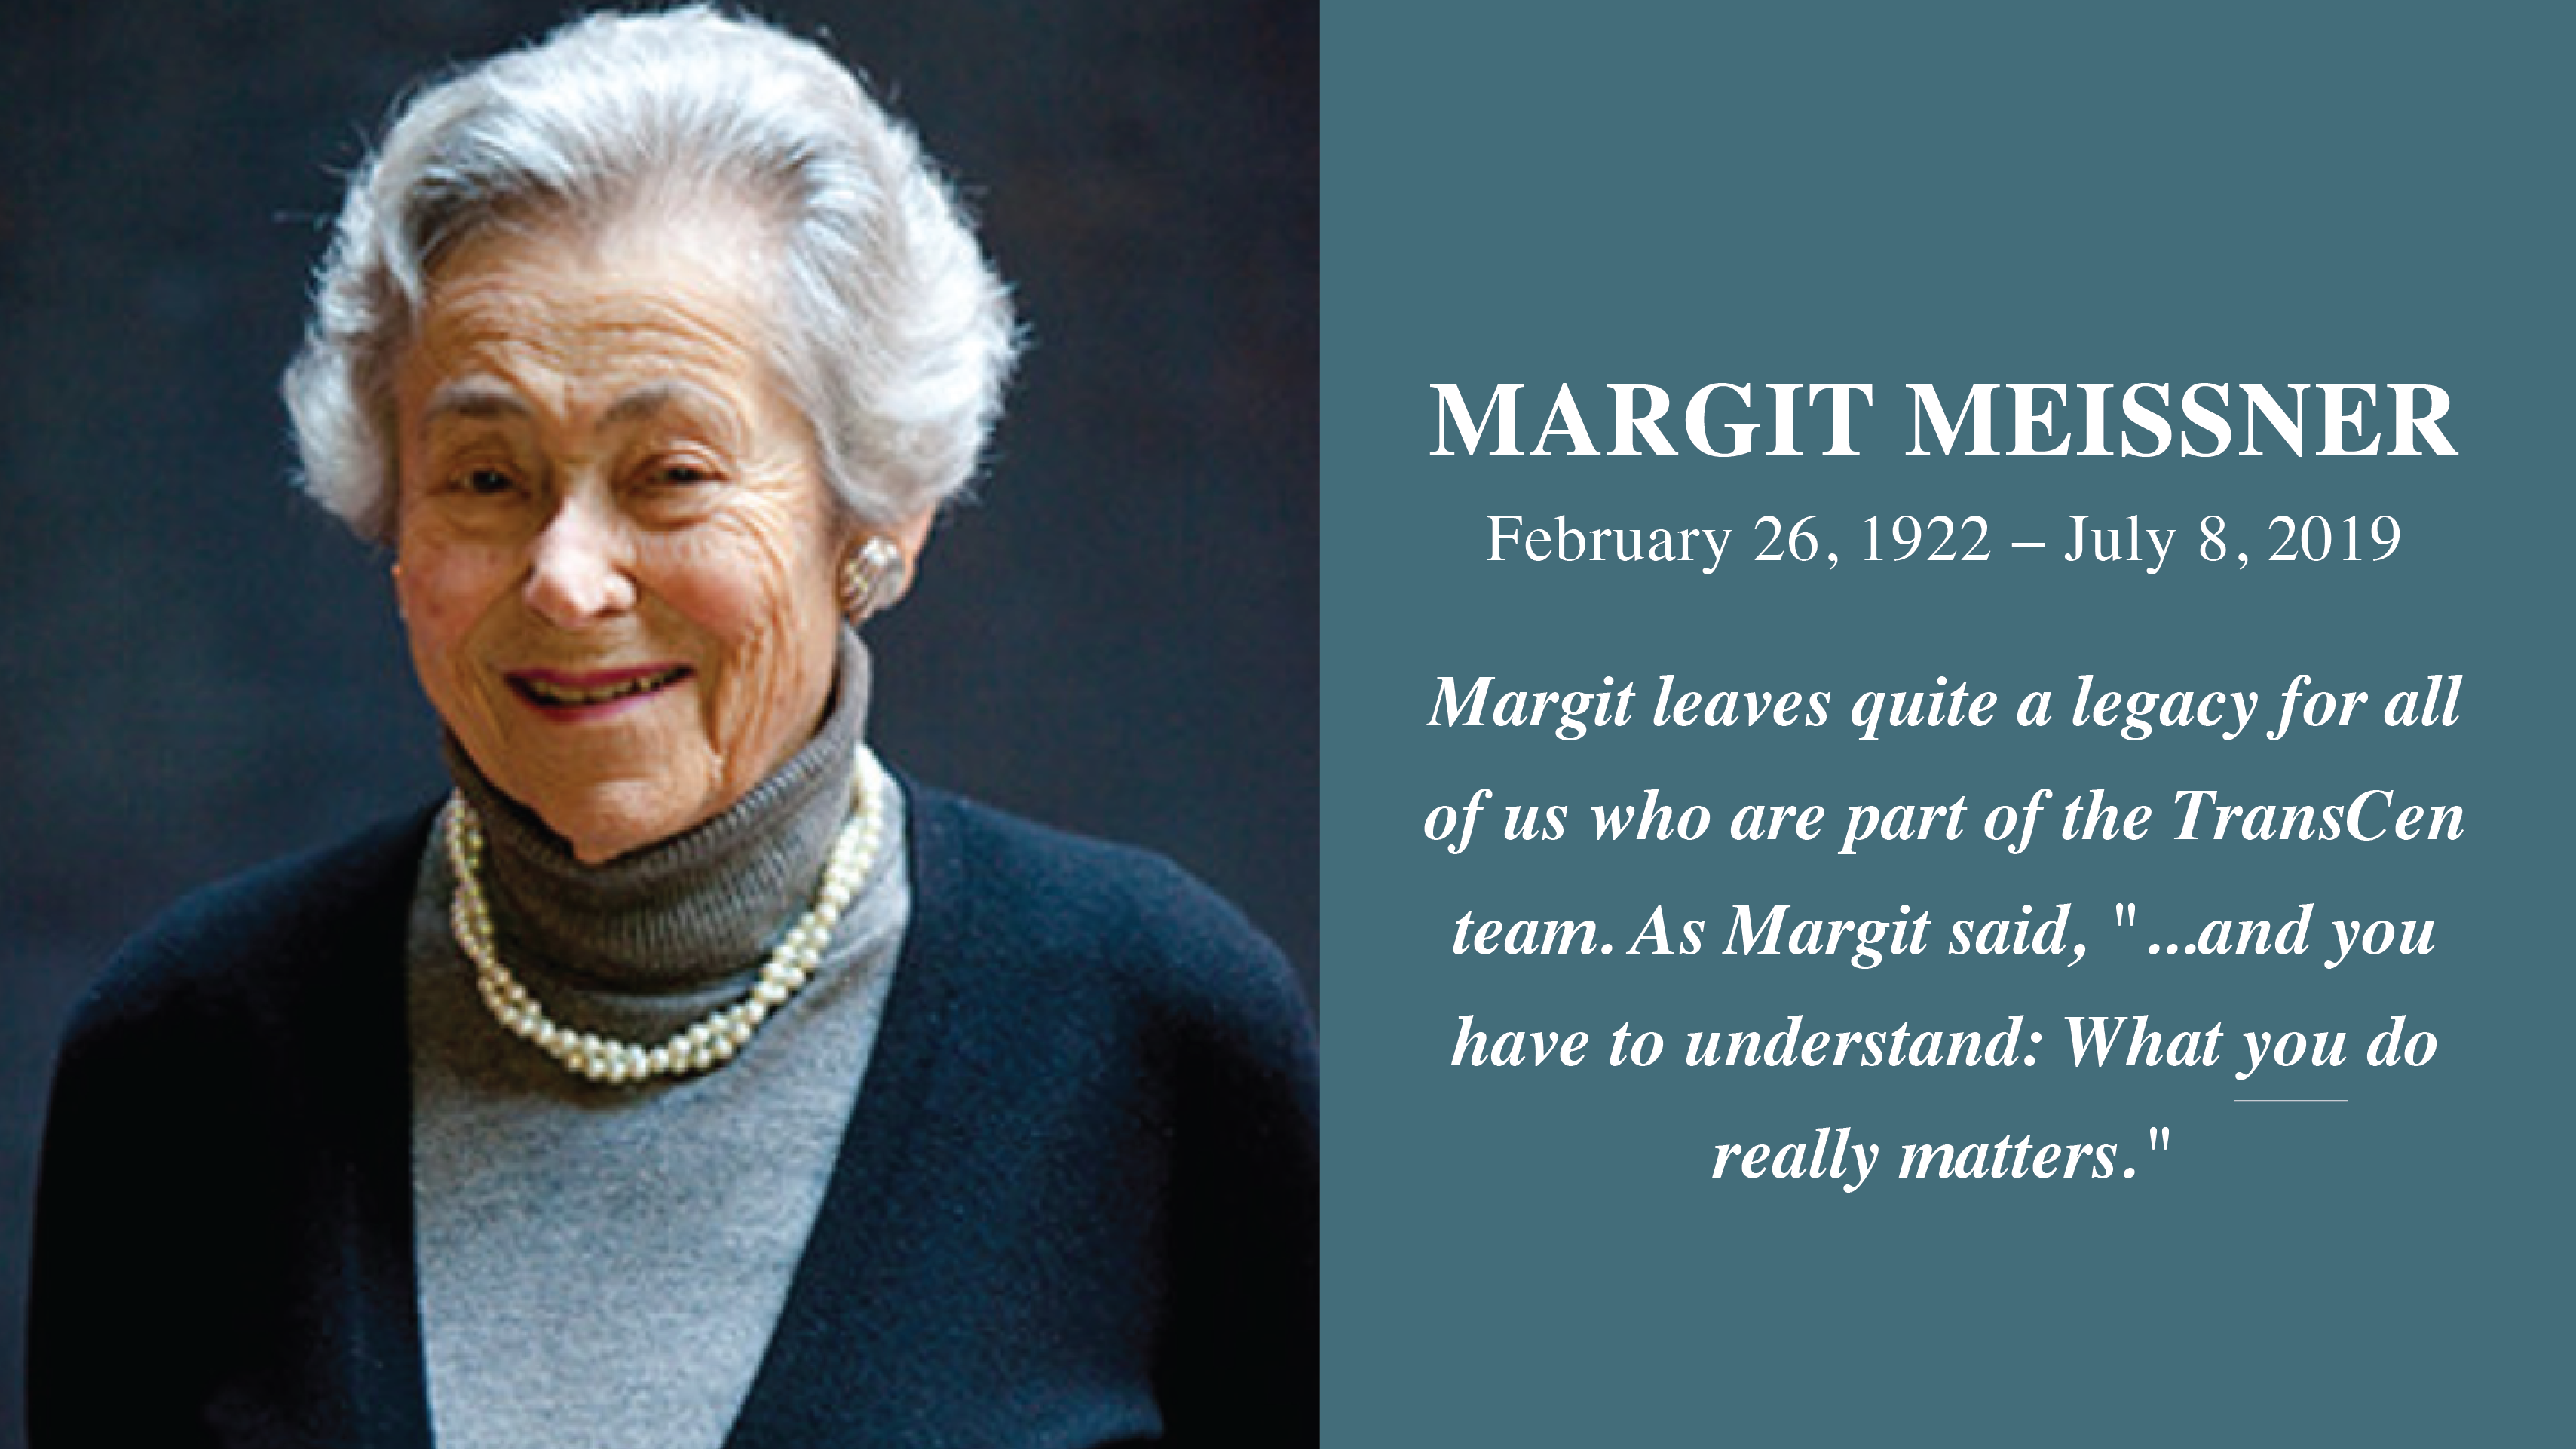 Margit Meissner - February 26, 1922 - July 8, 2019. Margit leaves quite a legacy for all of us who are part of the TransCen team. As Margit said, "...and you have to understand: What you do really matters."